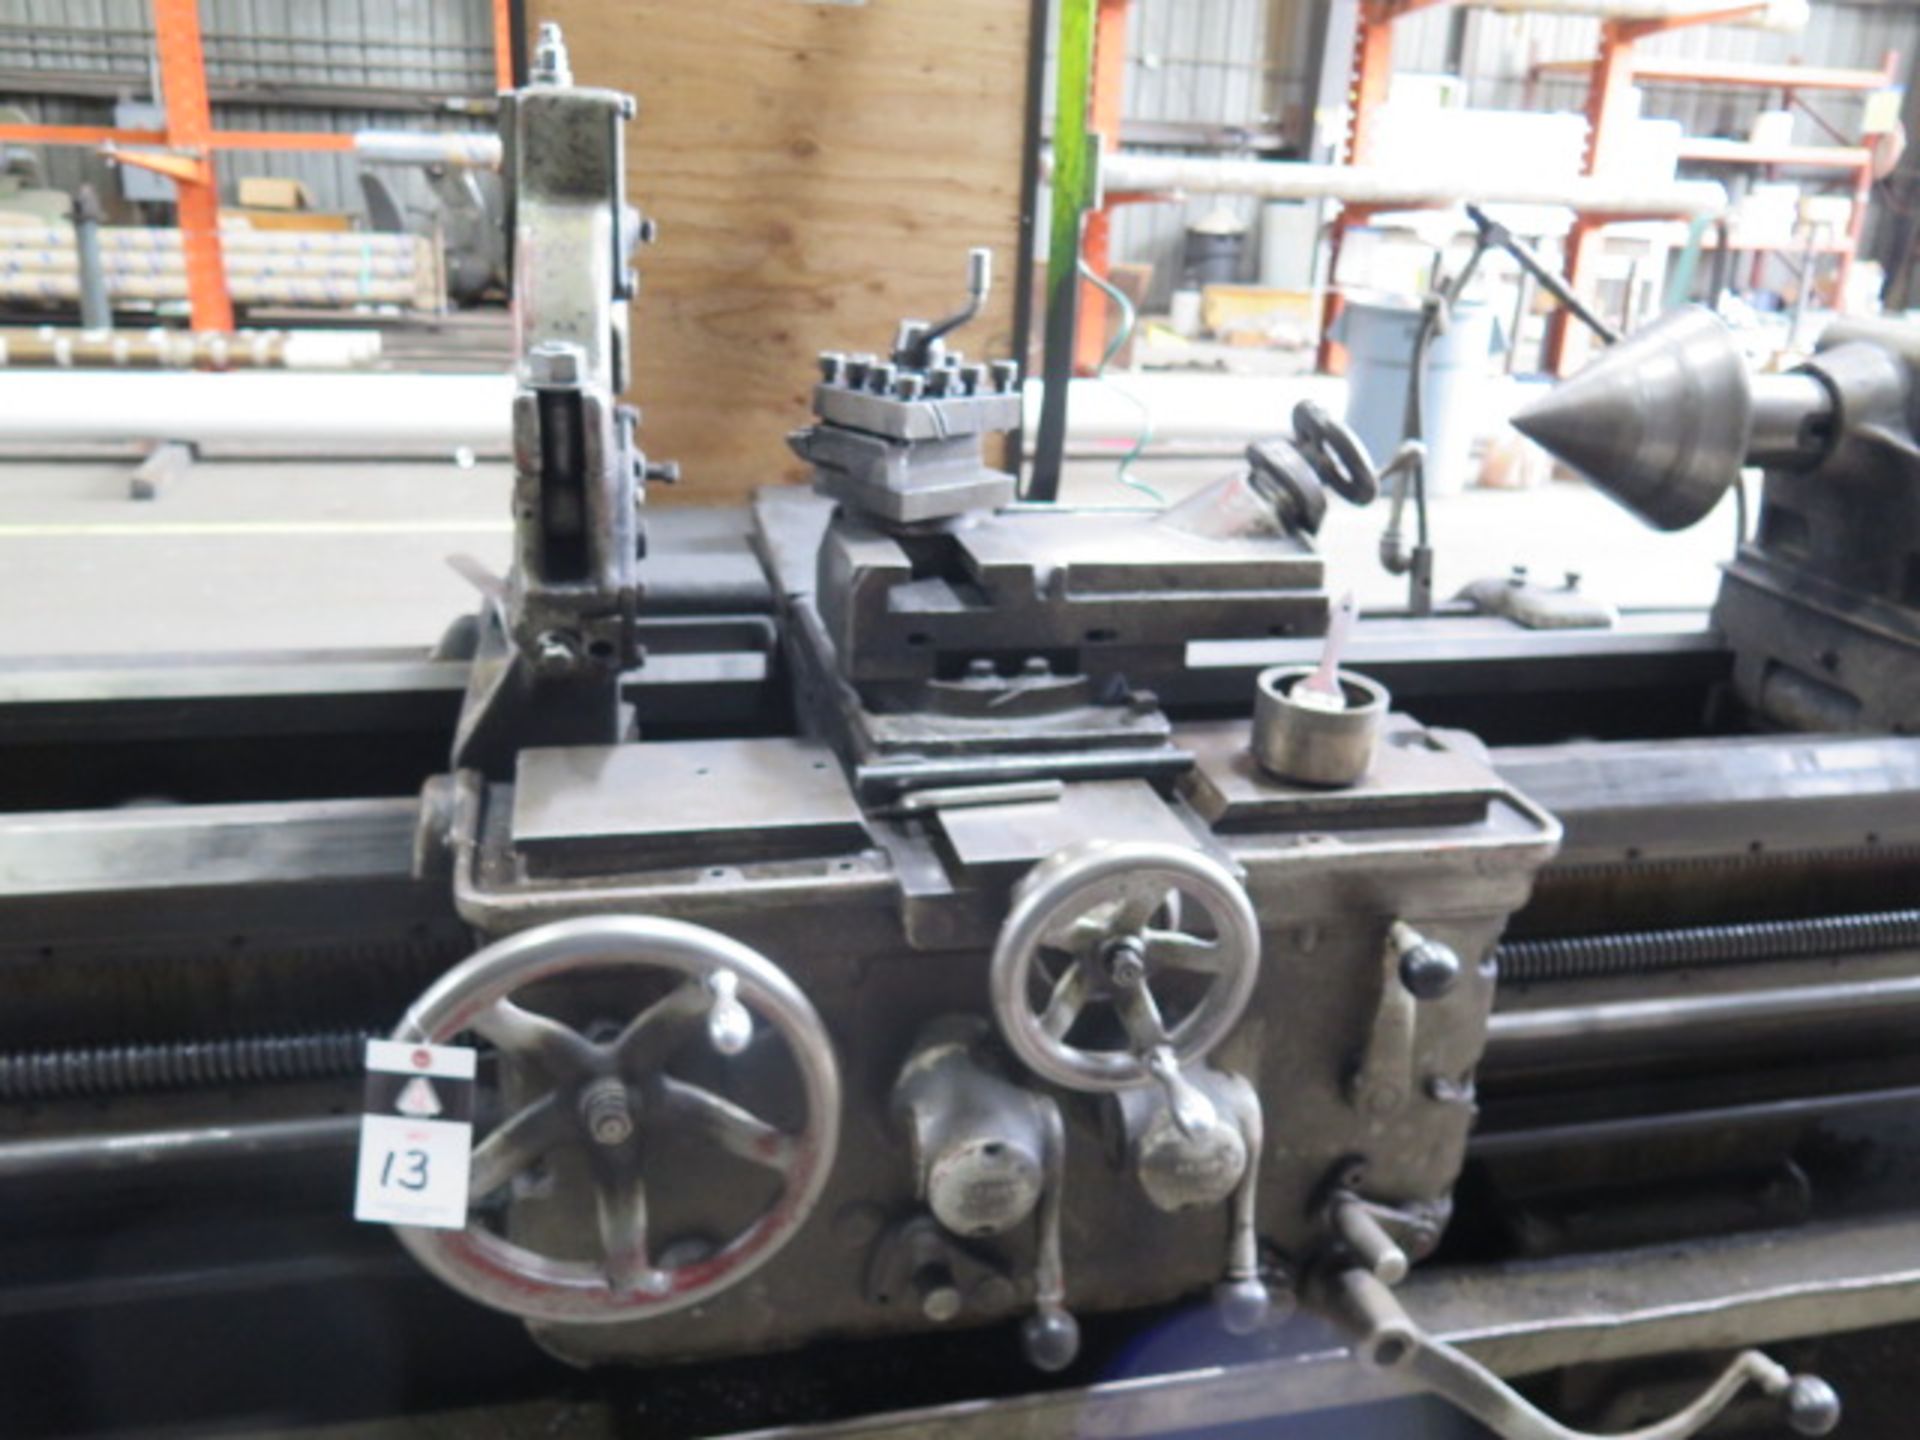 Axelson 25 28” x 216” Geared Head Lathe w/ 24’ Bed, 8-555 RPM,Taper Attachment, Tailstock,SOLD AS IS - Image 9 of 12